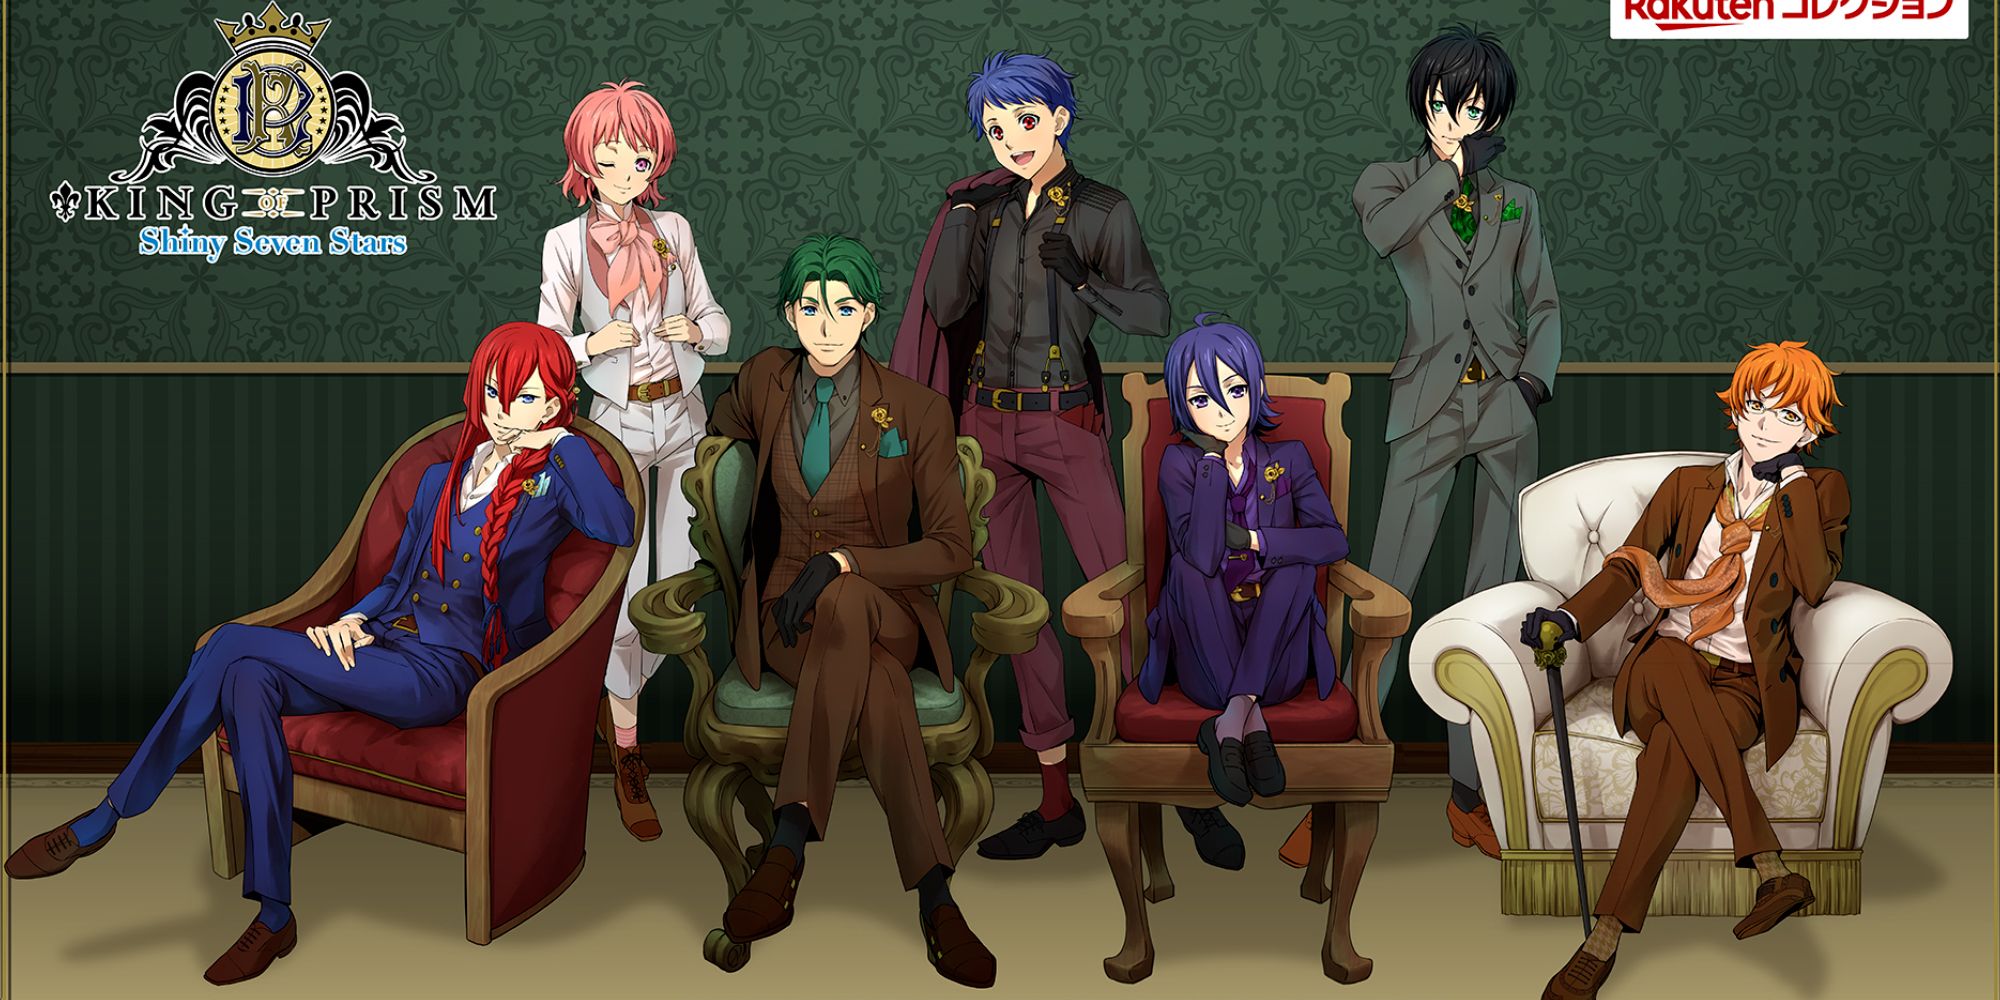 Image Depicting the Main Characters of King of Prism by Pretty Rhythm